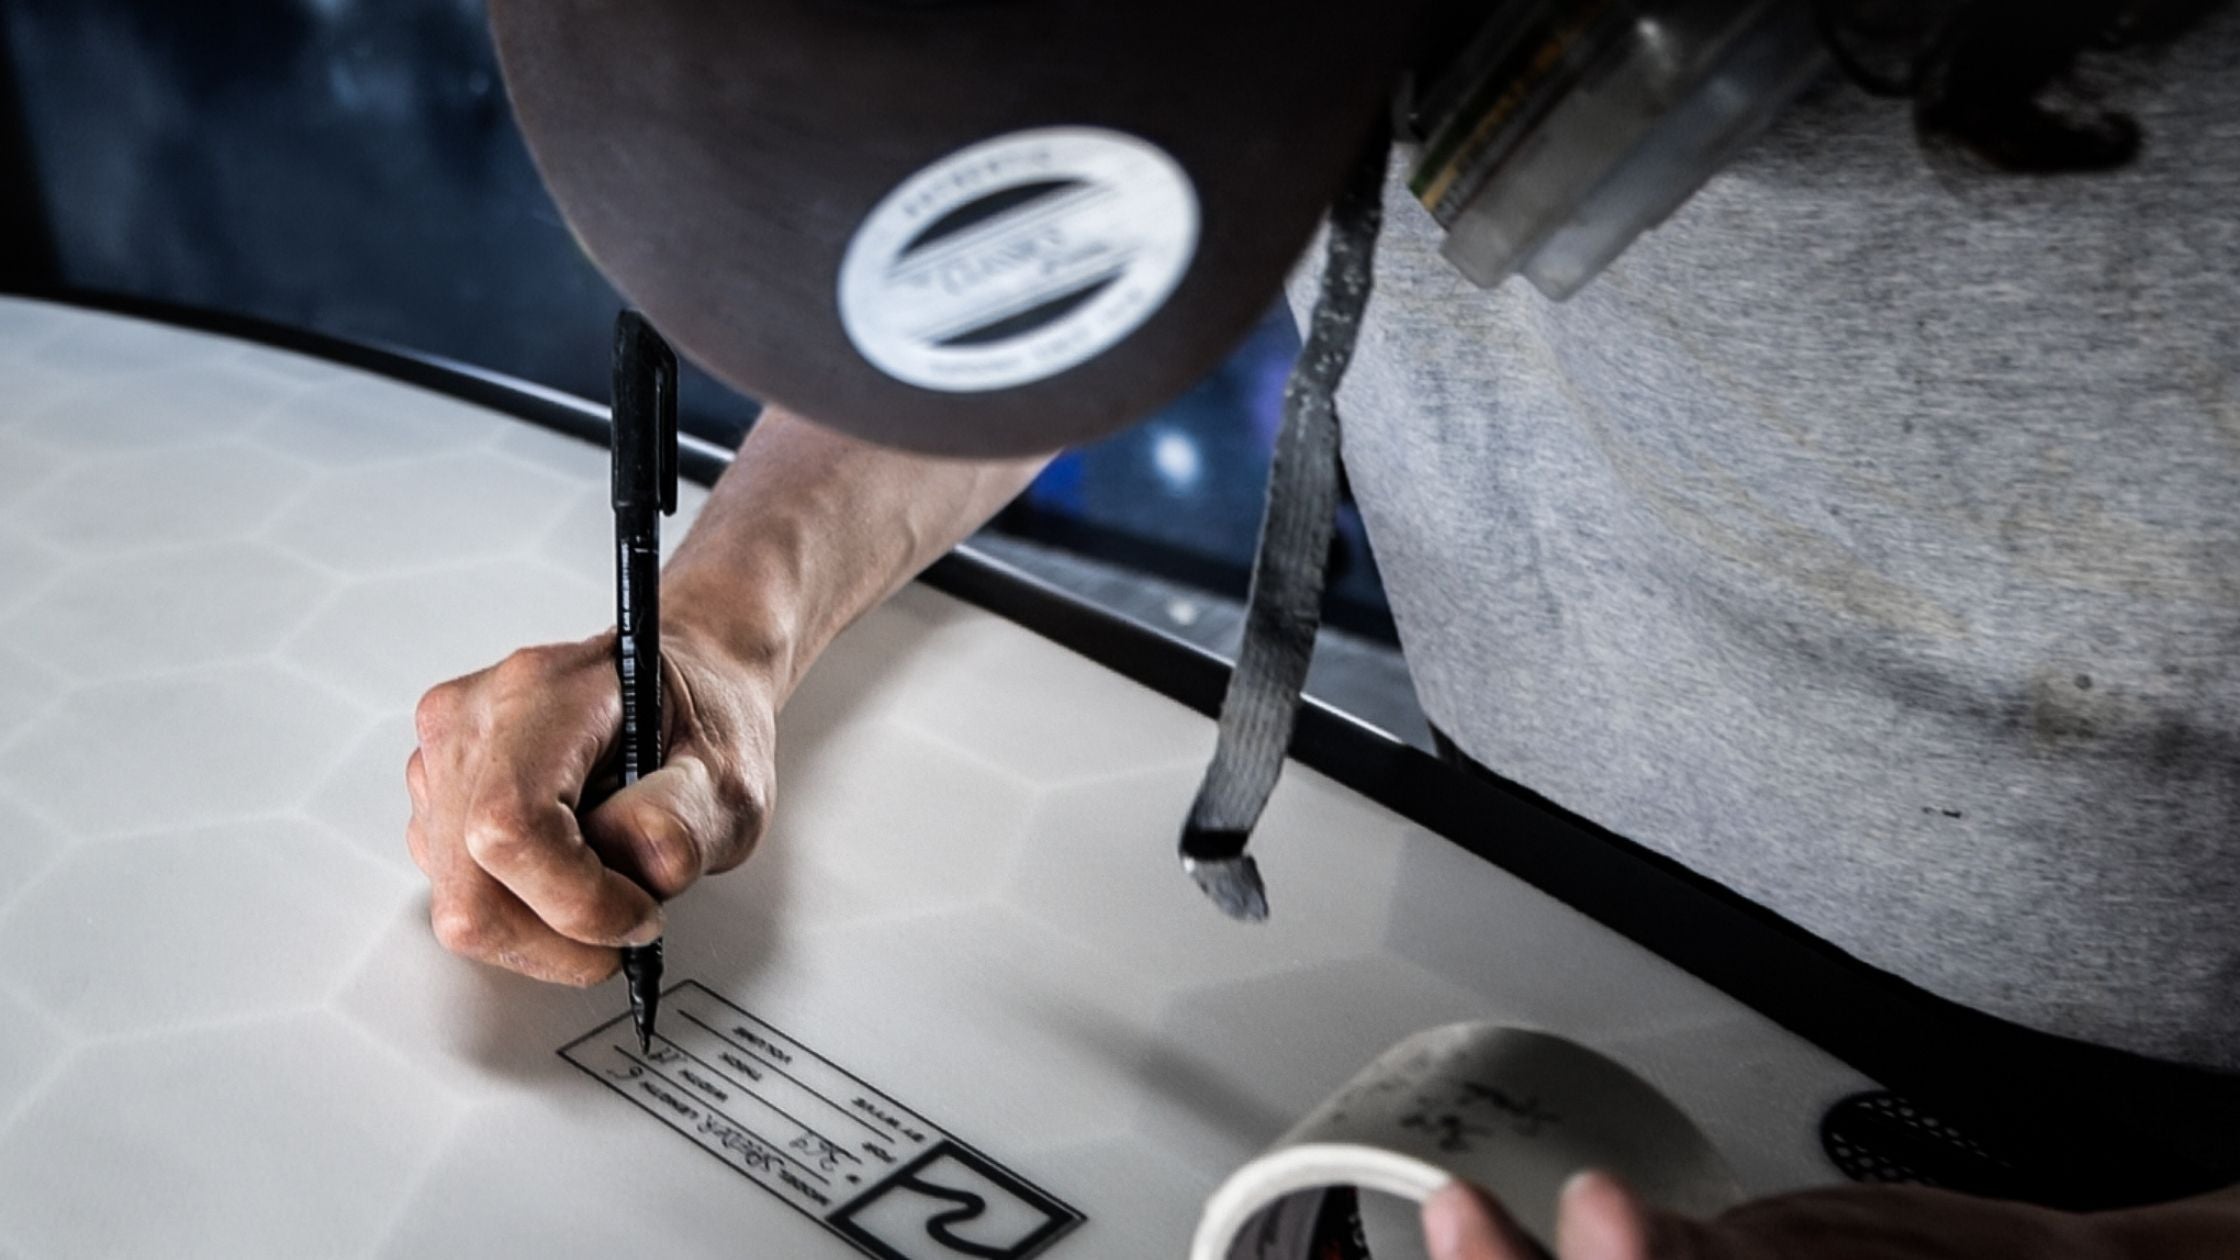 Shaper writing on the bottom of a 3D printed surfboard from Wyve in a surf shaping room